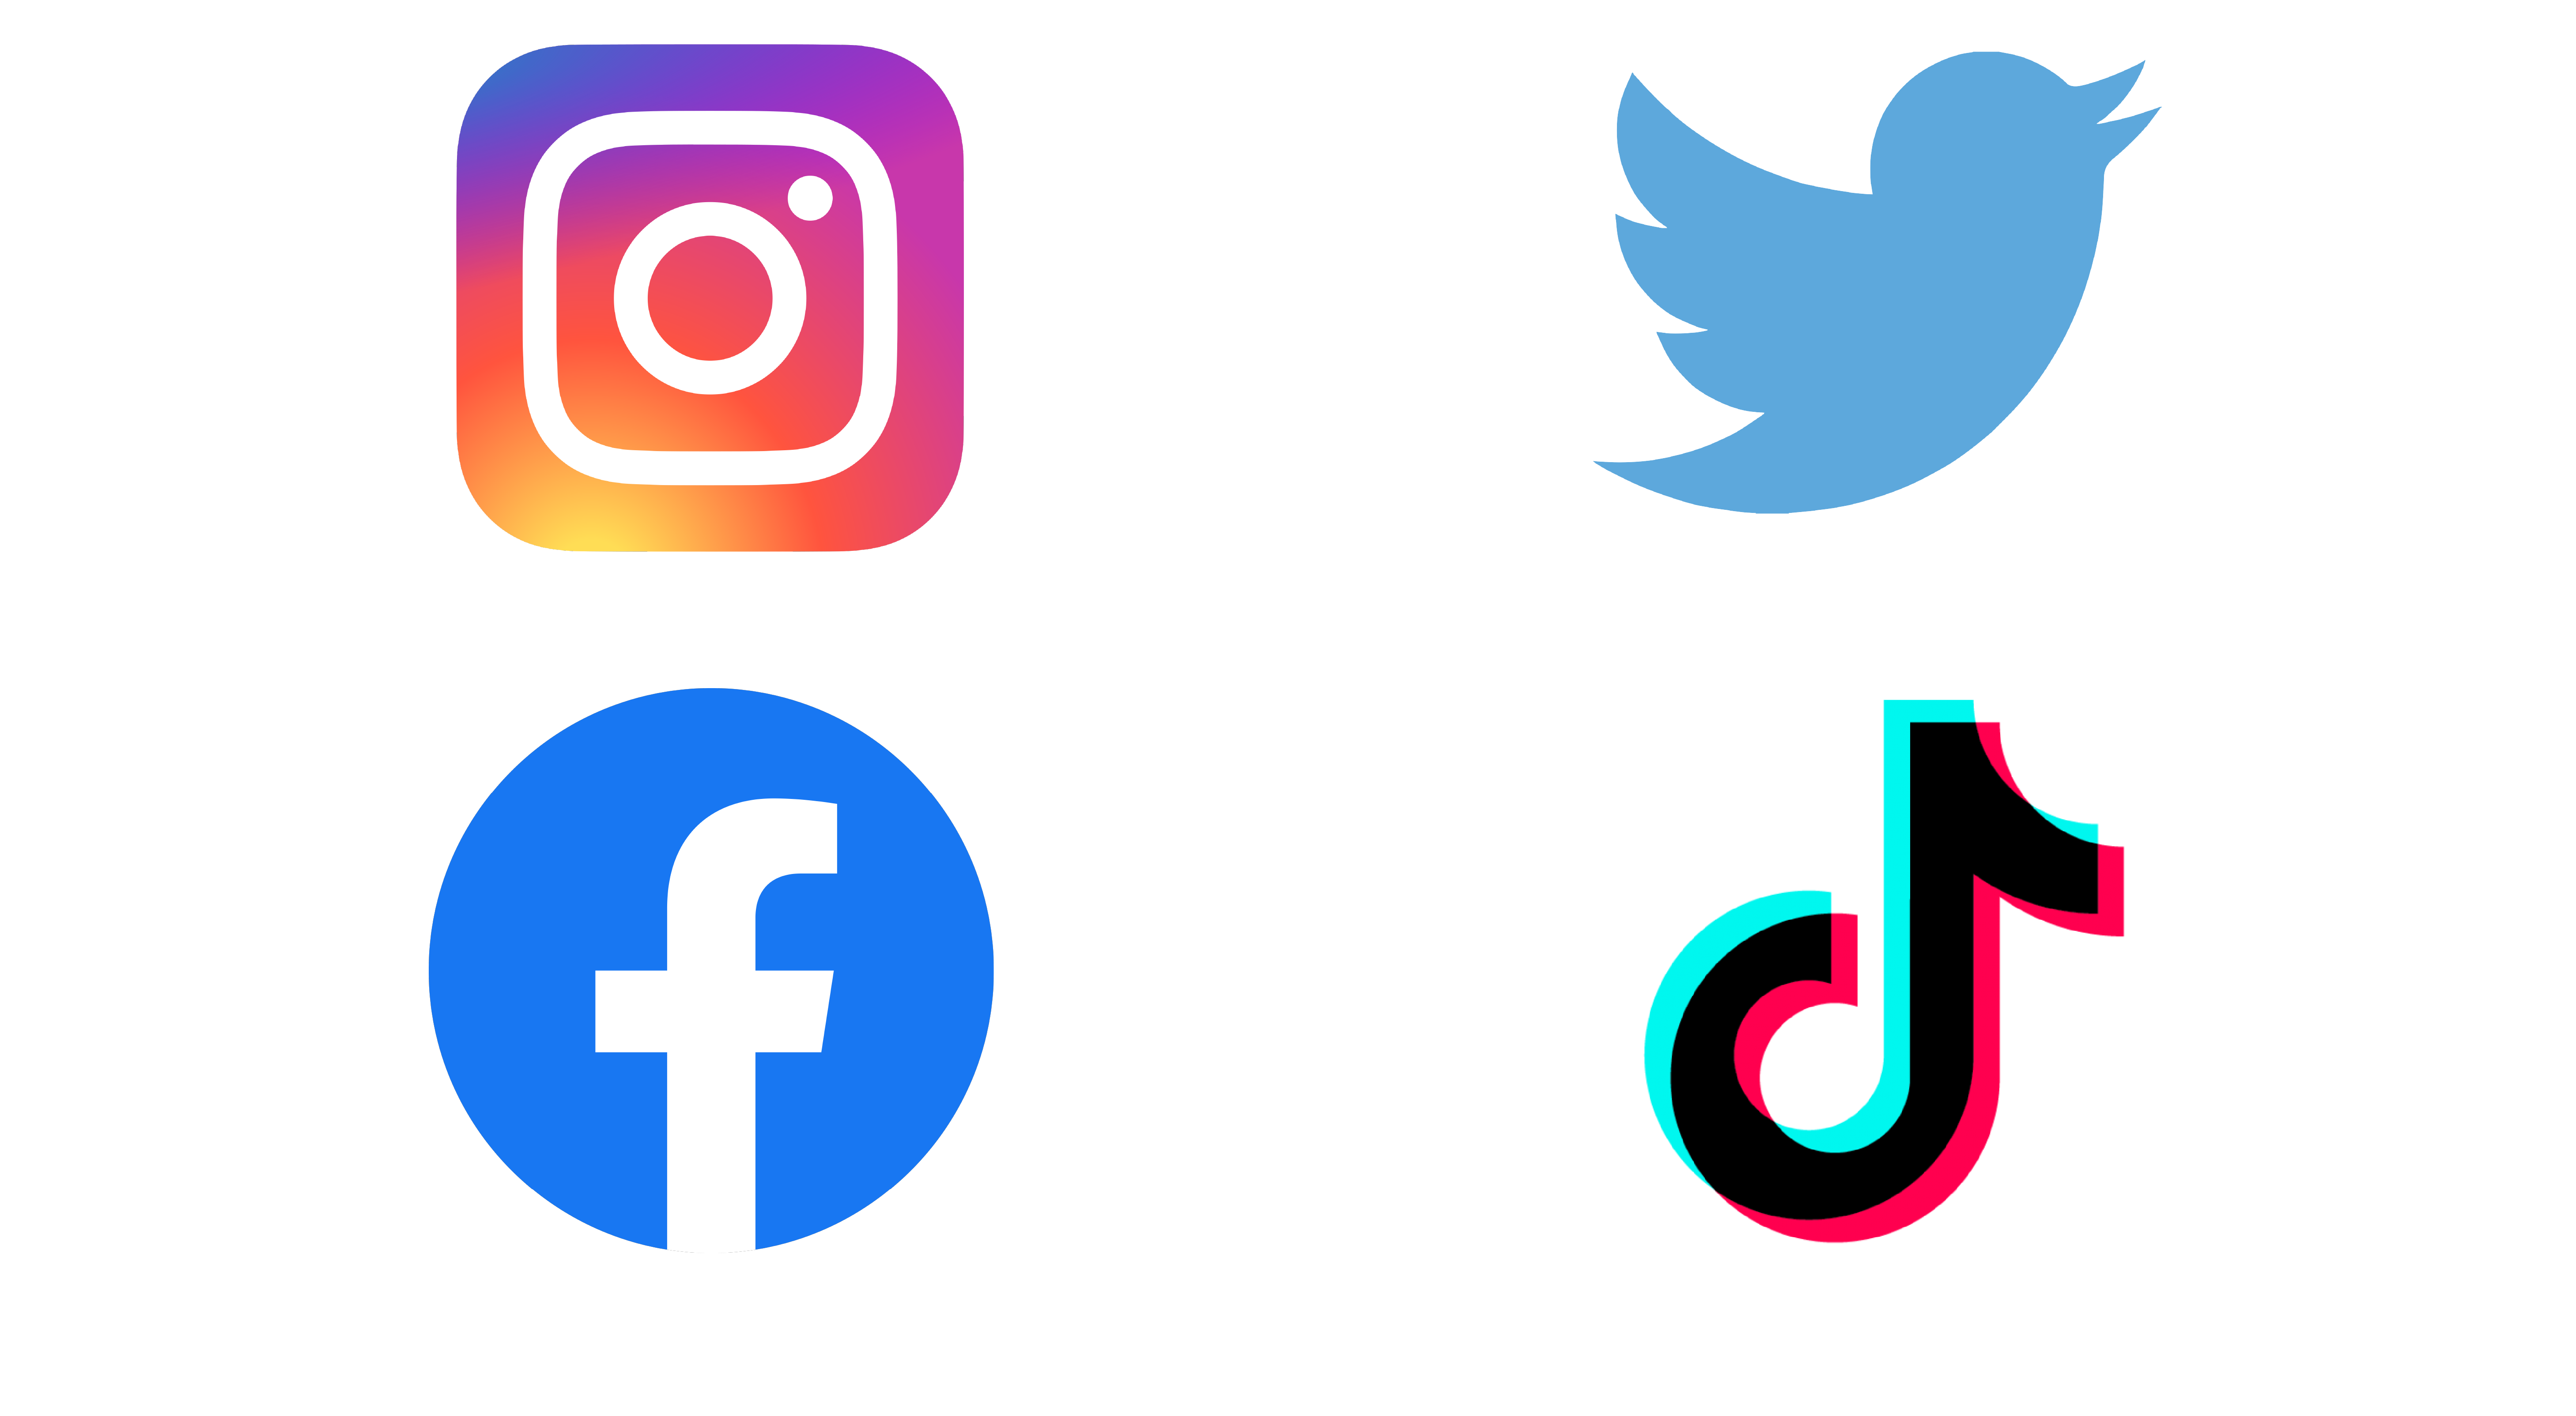 Logos from several different social media apps aligned in a grid.